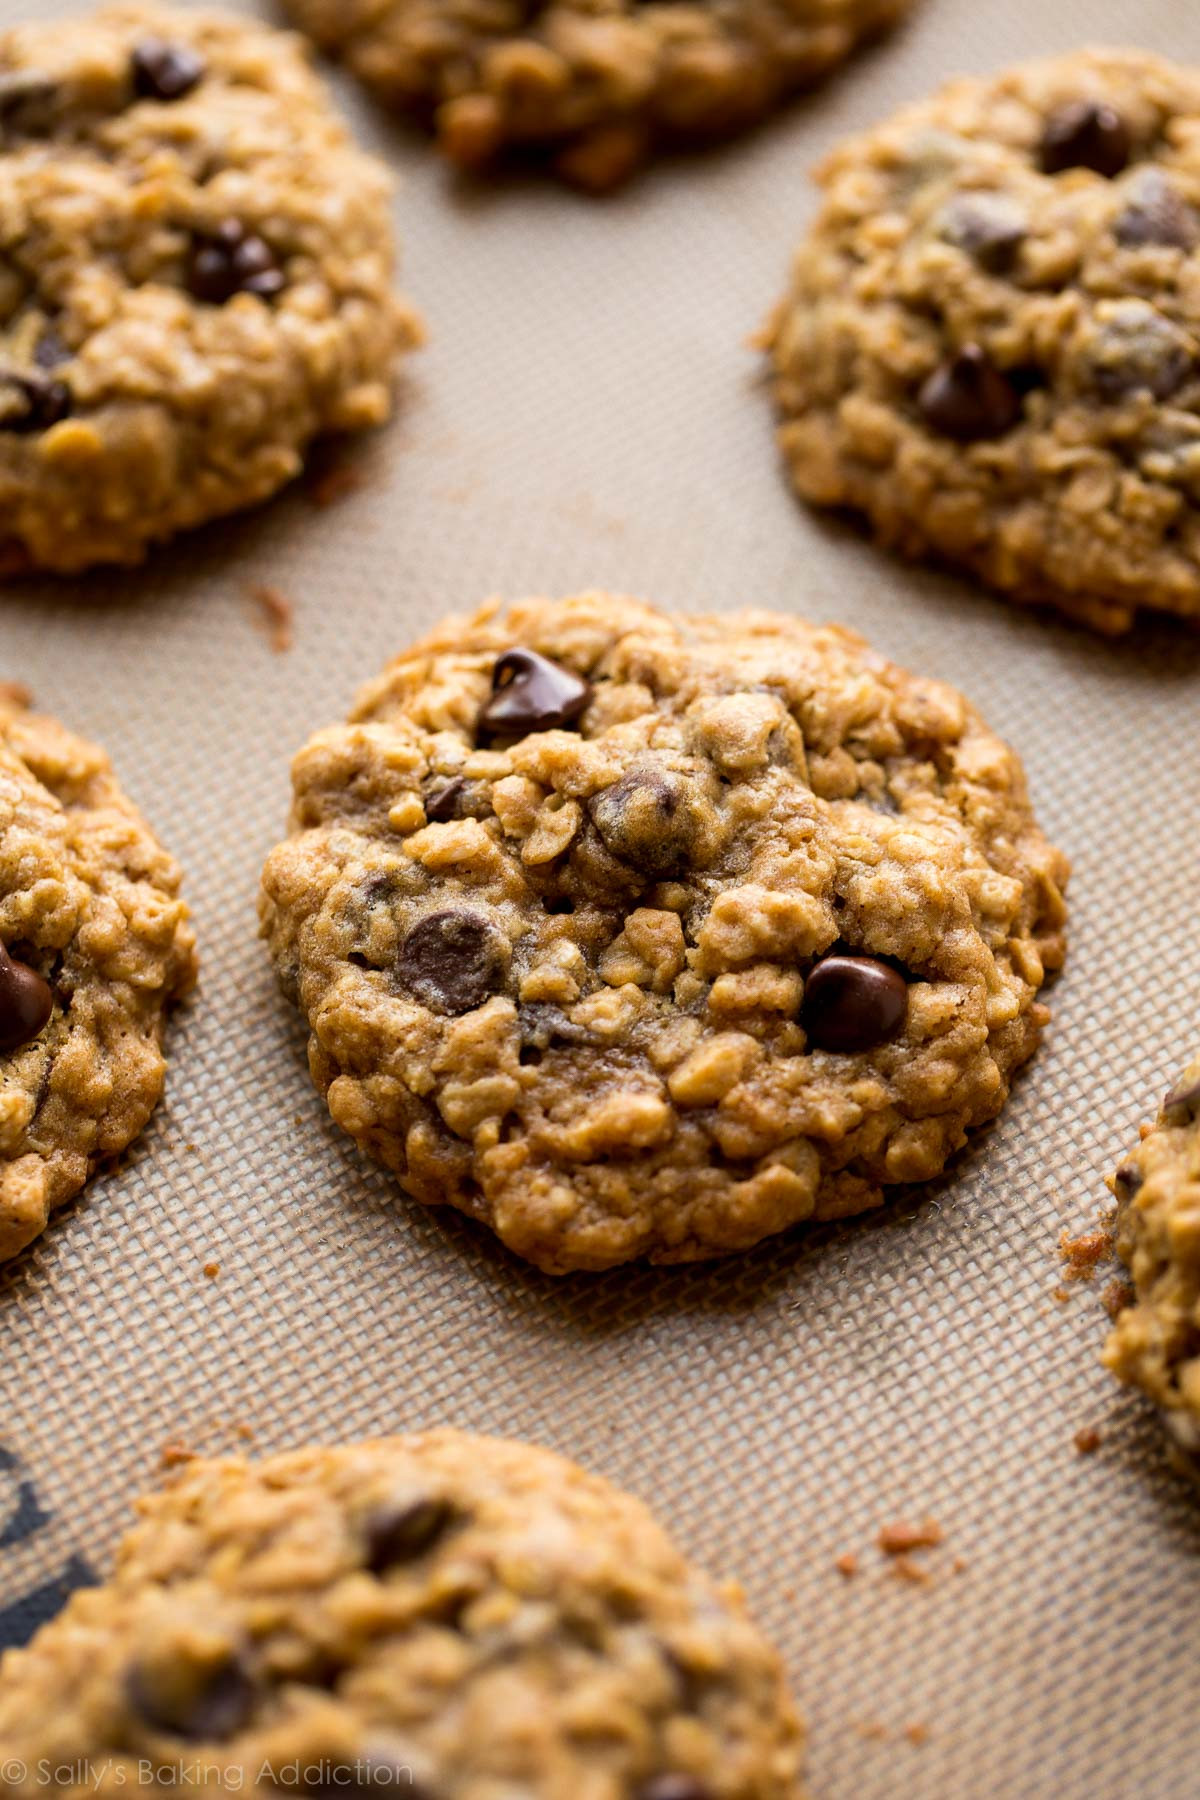 Oatmeal Chocolate Chip Cookies Recipe
 Soft & Chewy Oatmeal Chocolate Chip Cookies Sallys